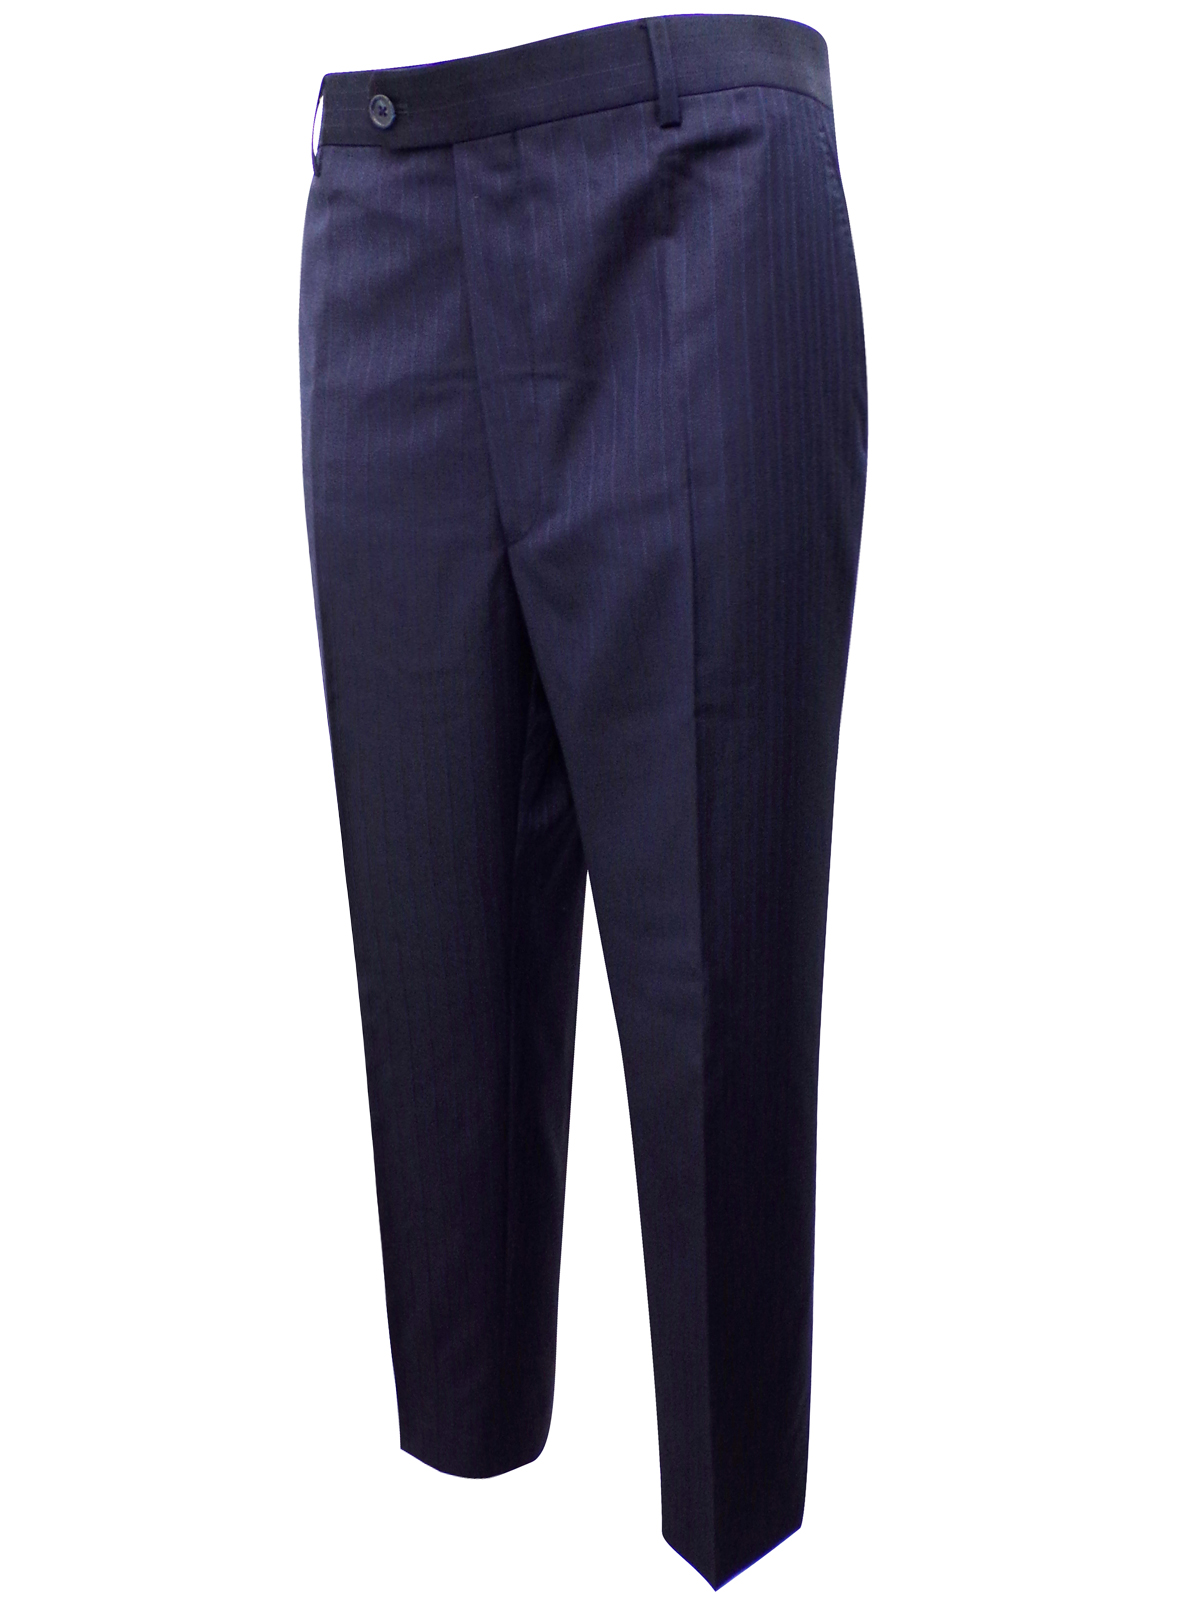 Marks and Spencer - - M&5 NAVY Pure Wool Flat Front Pinstripe Trousers ...